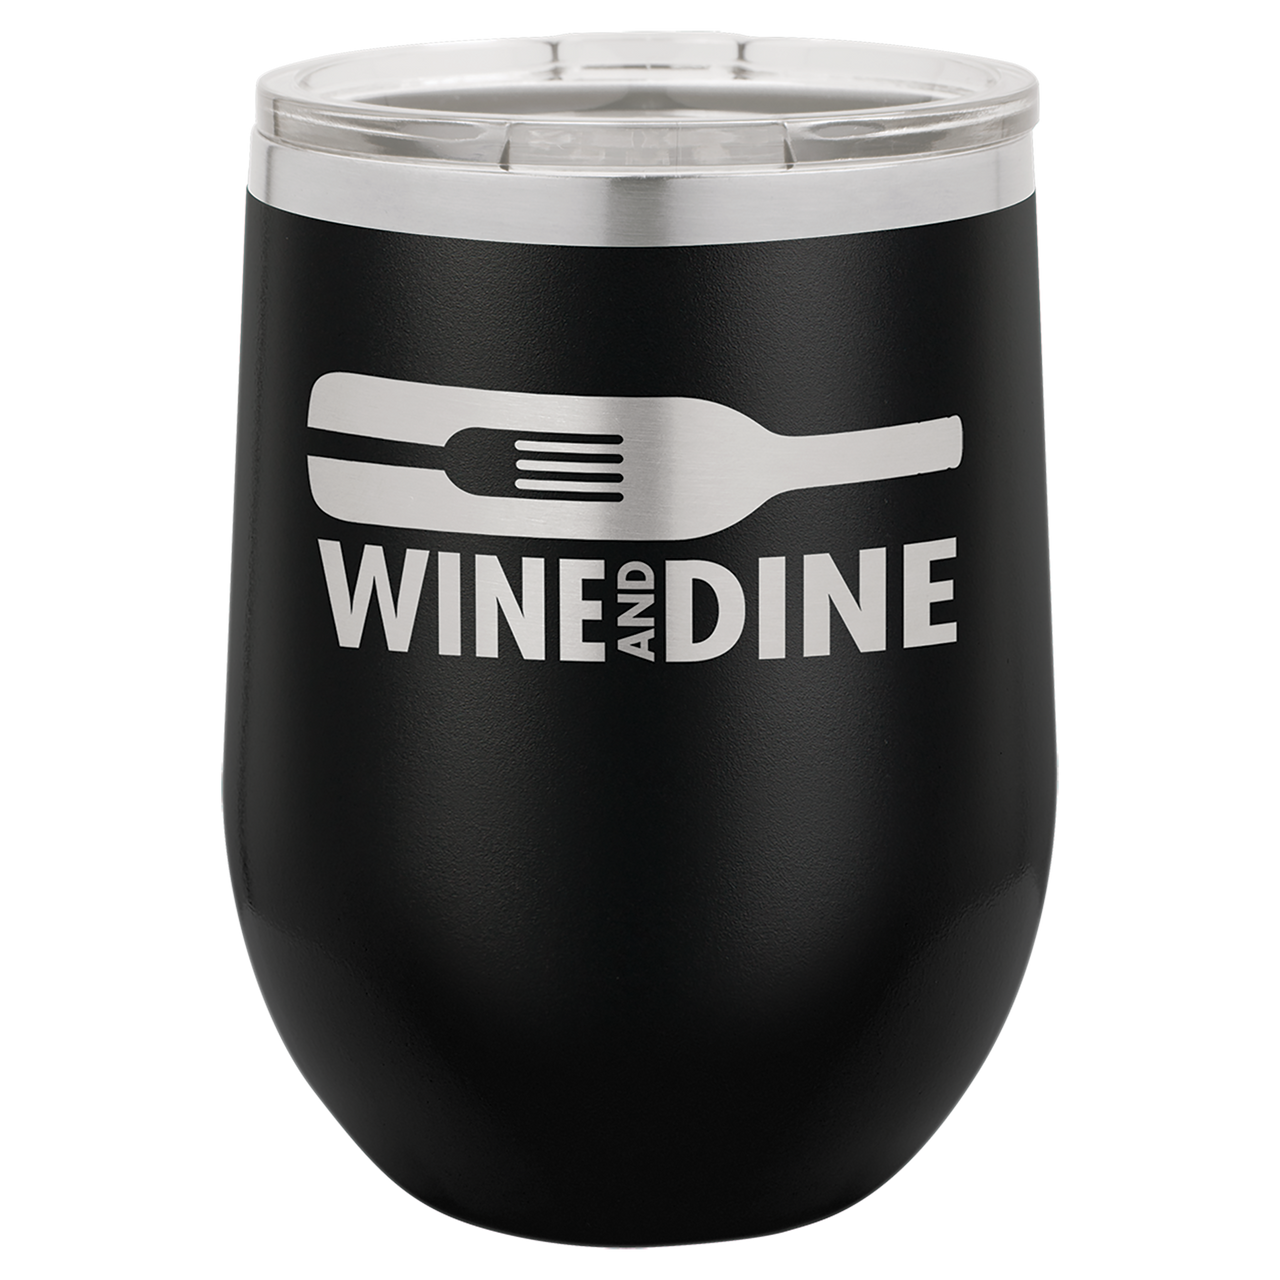 Personalized Wine Tumbler 12oz With Bulk Pricing Great for Custom